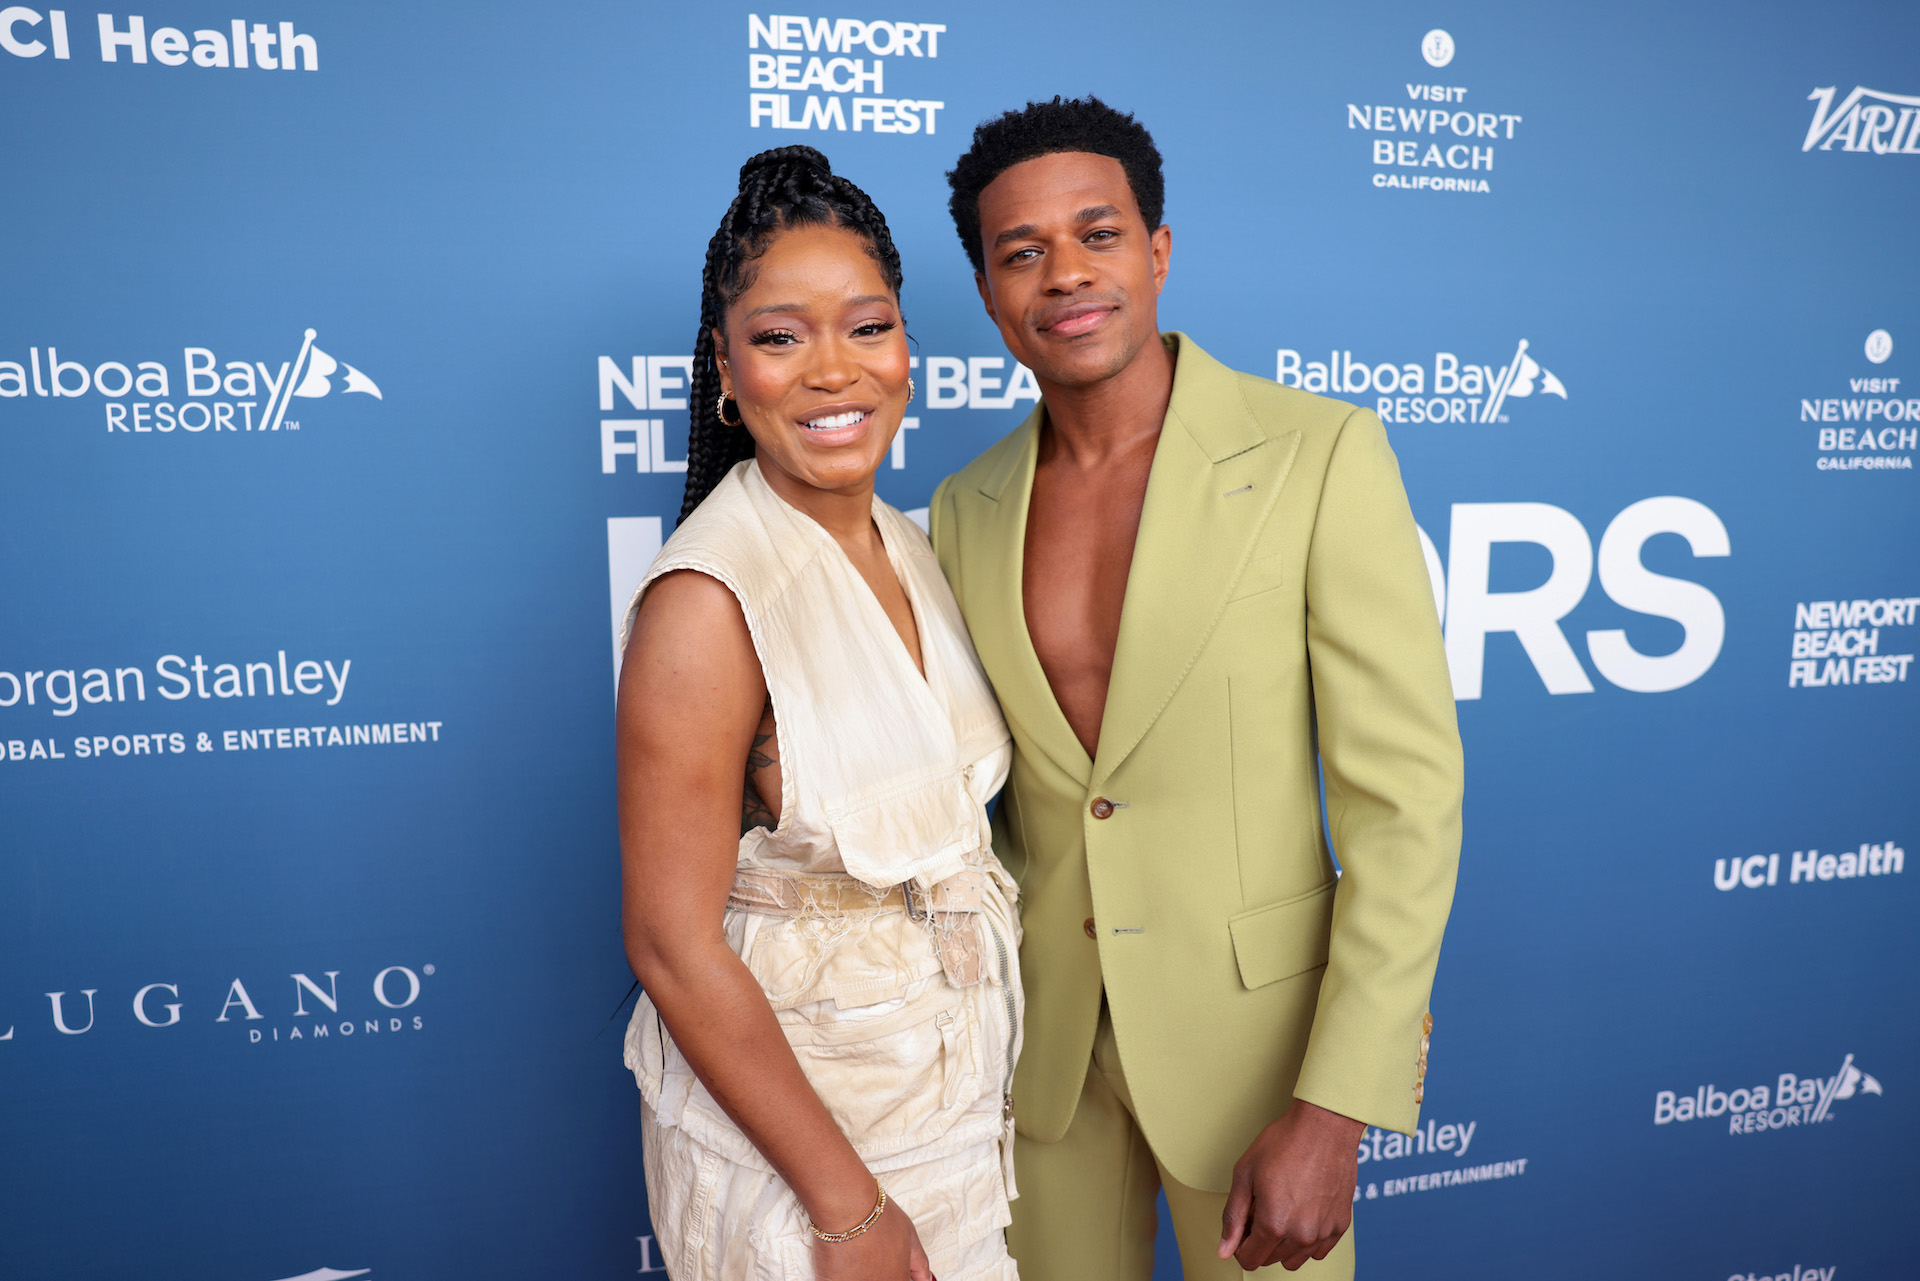 NEWPORT BEACH, CALIFORNIA - OCTOBER 16: (L-R) Artist of Distinction award honoree Keke Palmer and Jeremy Pope attend the 2022 Newport Beach Film Festival Honors at The Balboa Bay Club and Resort on October 16, 2022 in Newport Beach, California. (Photo by Tiffany Rose/Getty Images for Newport Beach Film Festival)